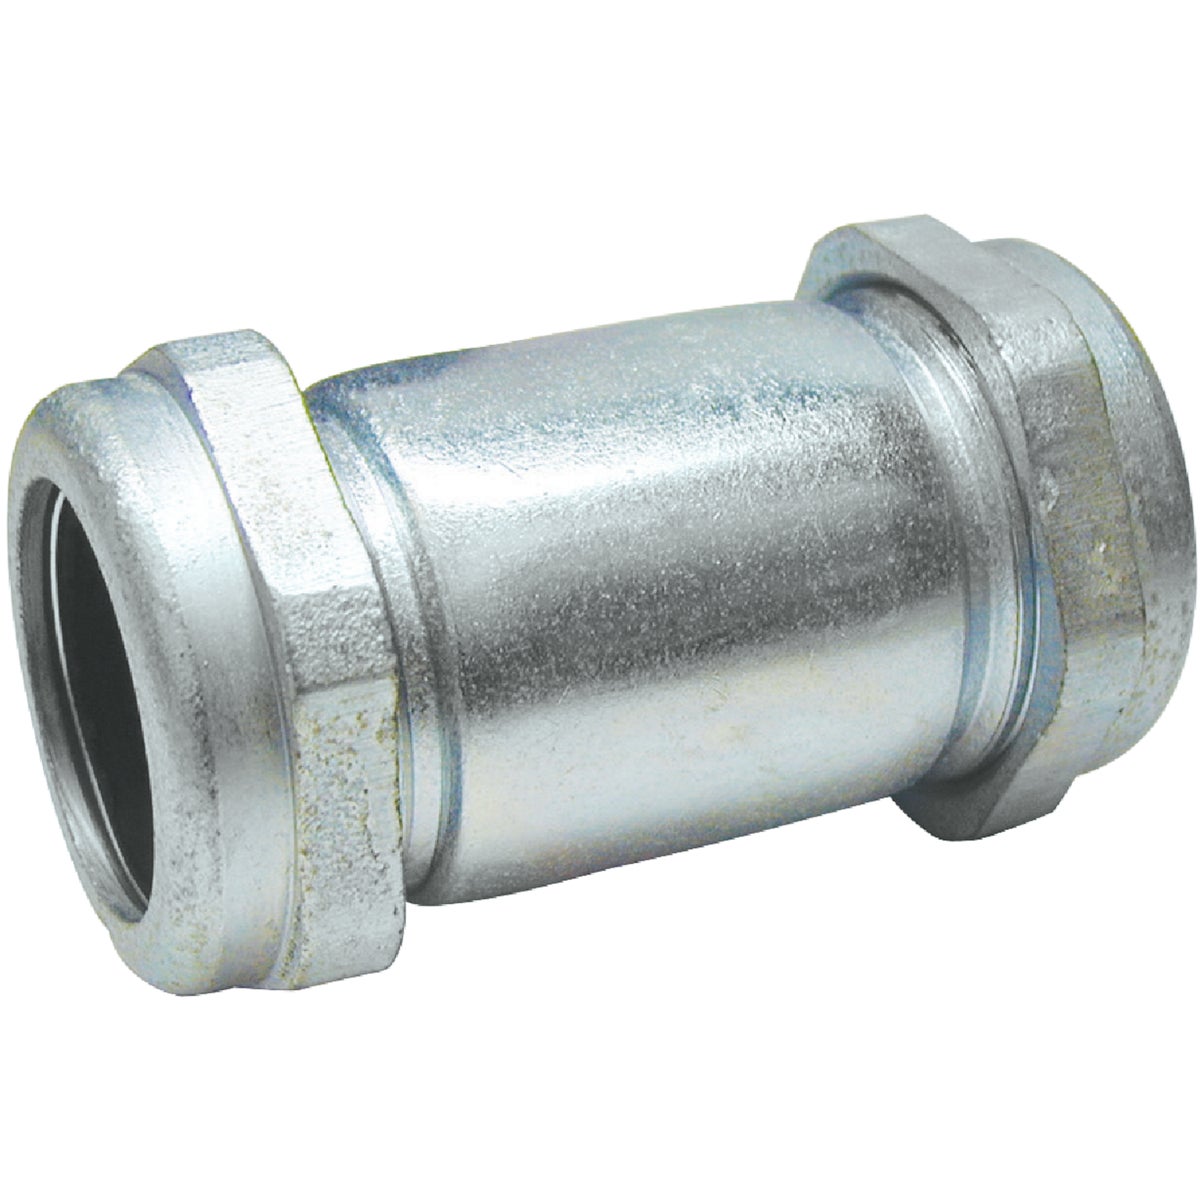 1-1/4X4-1/2GALV COUPLING